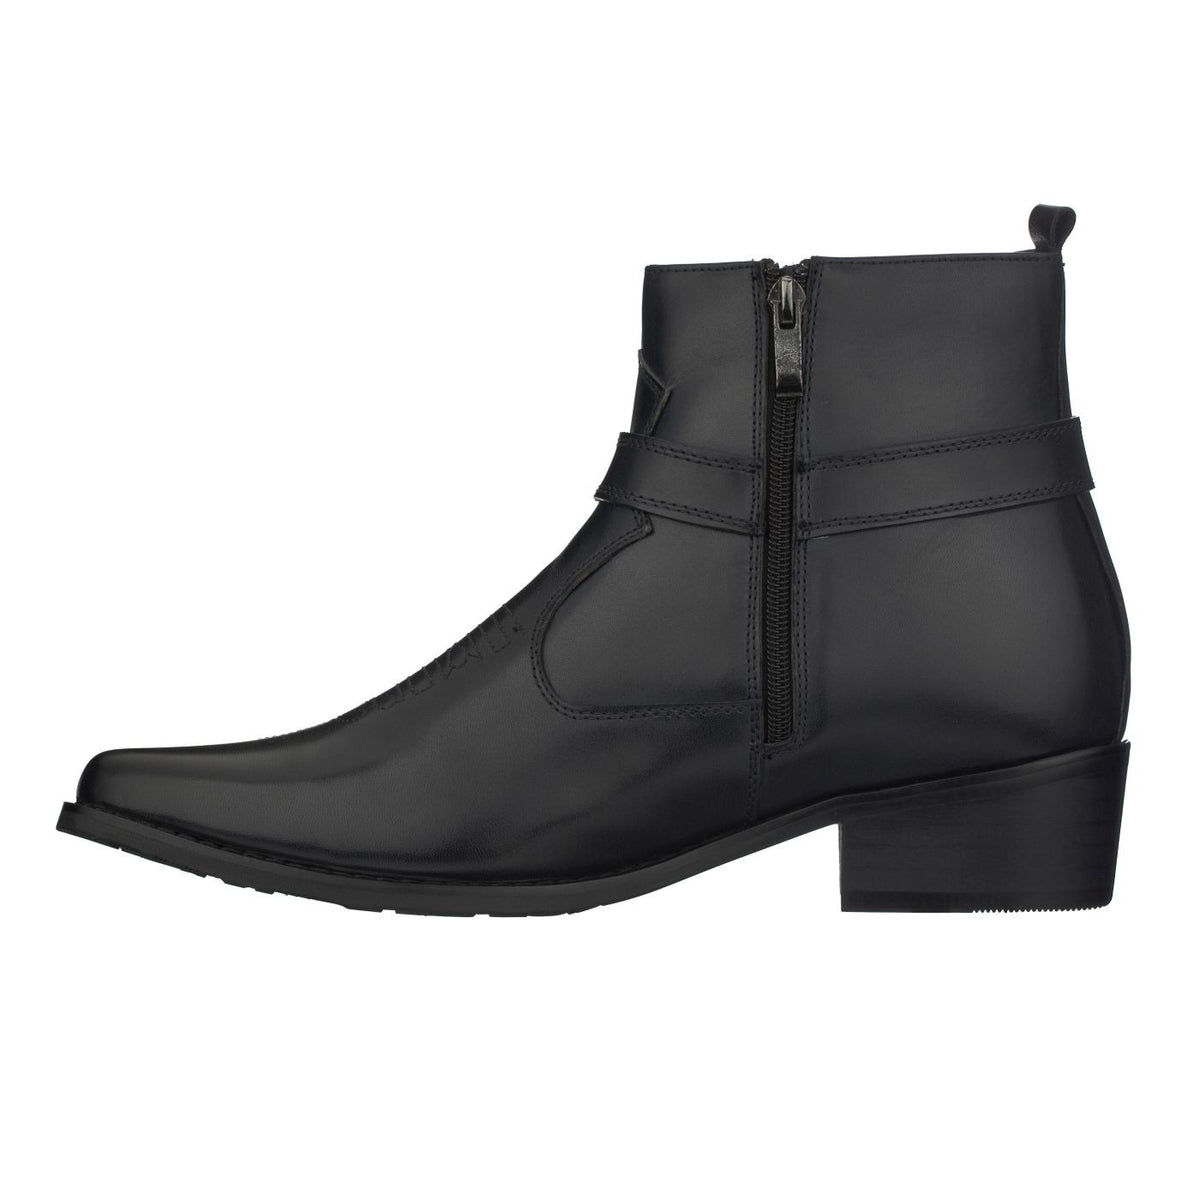 Almas Tower - Elevator Boots in Brushed Leather from 2.4 to 4 inches